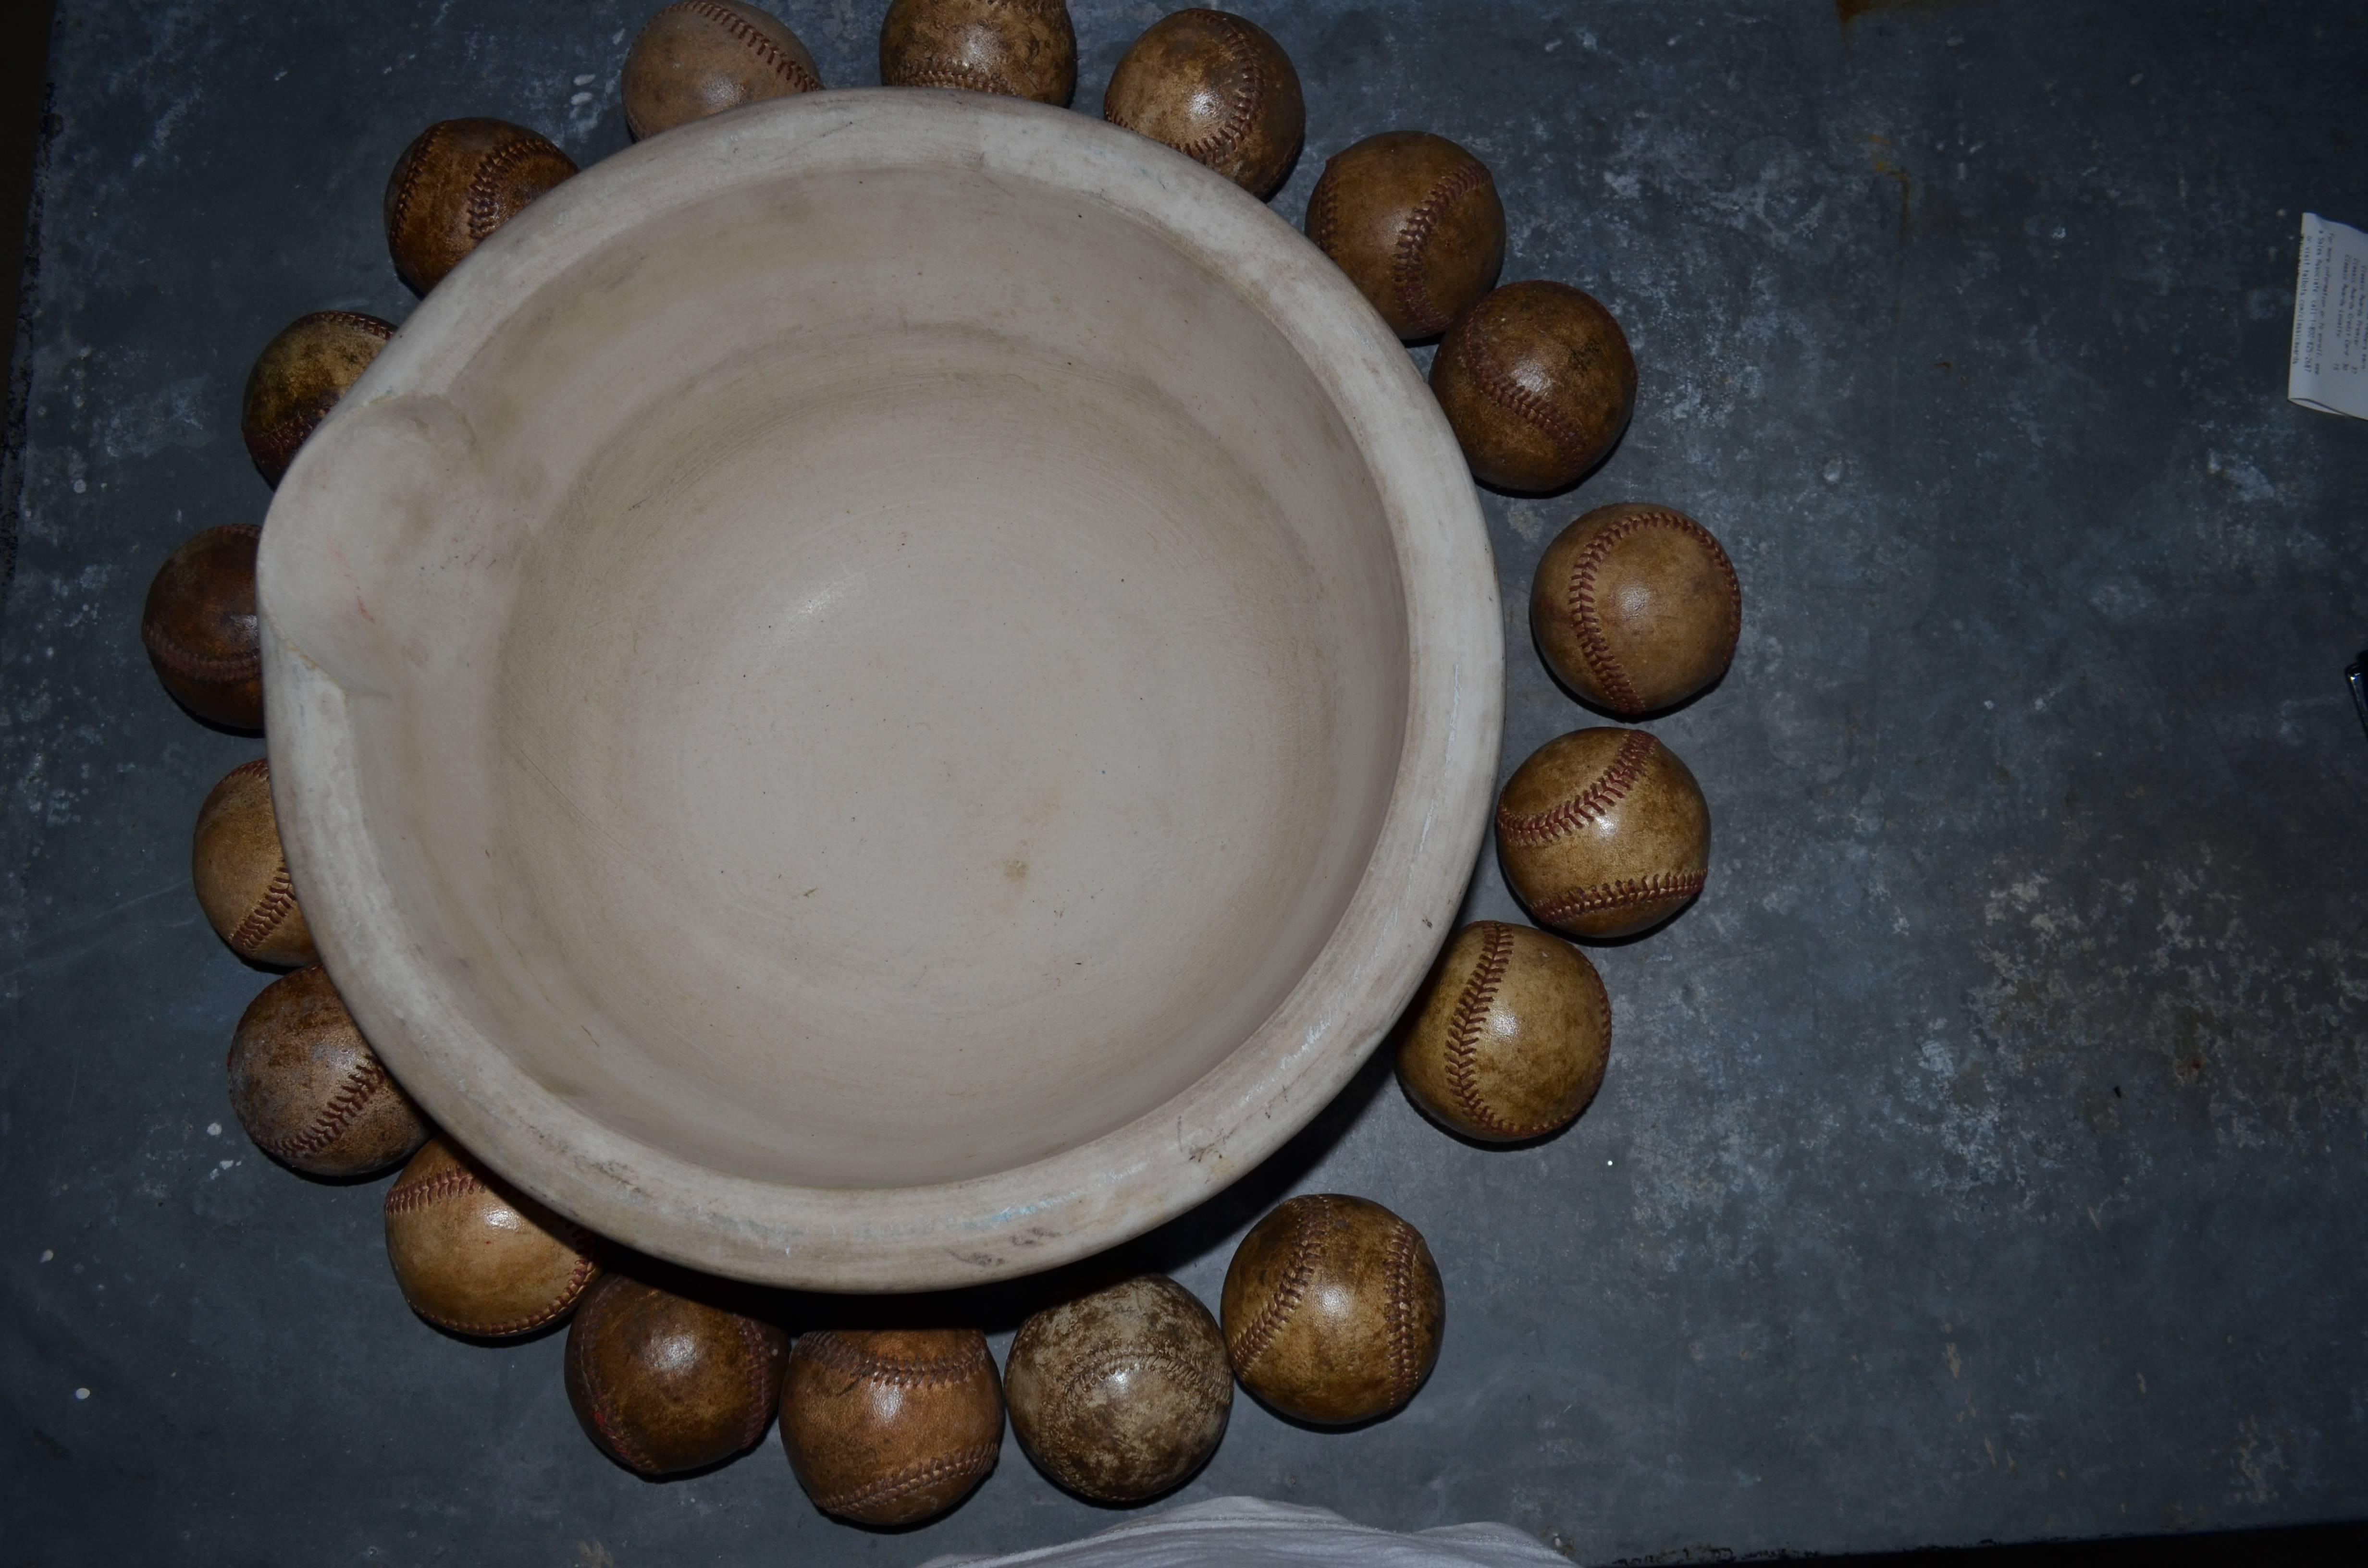 Mortar Bowl of Antique Stone with Display of Well-Worn Baseballs 2